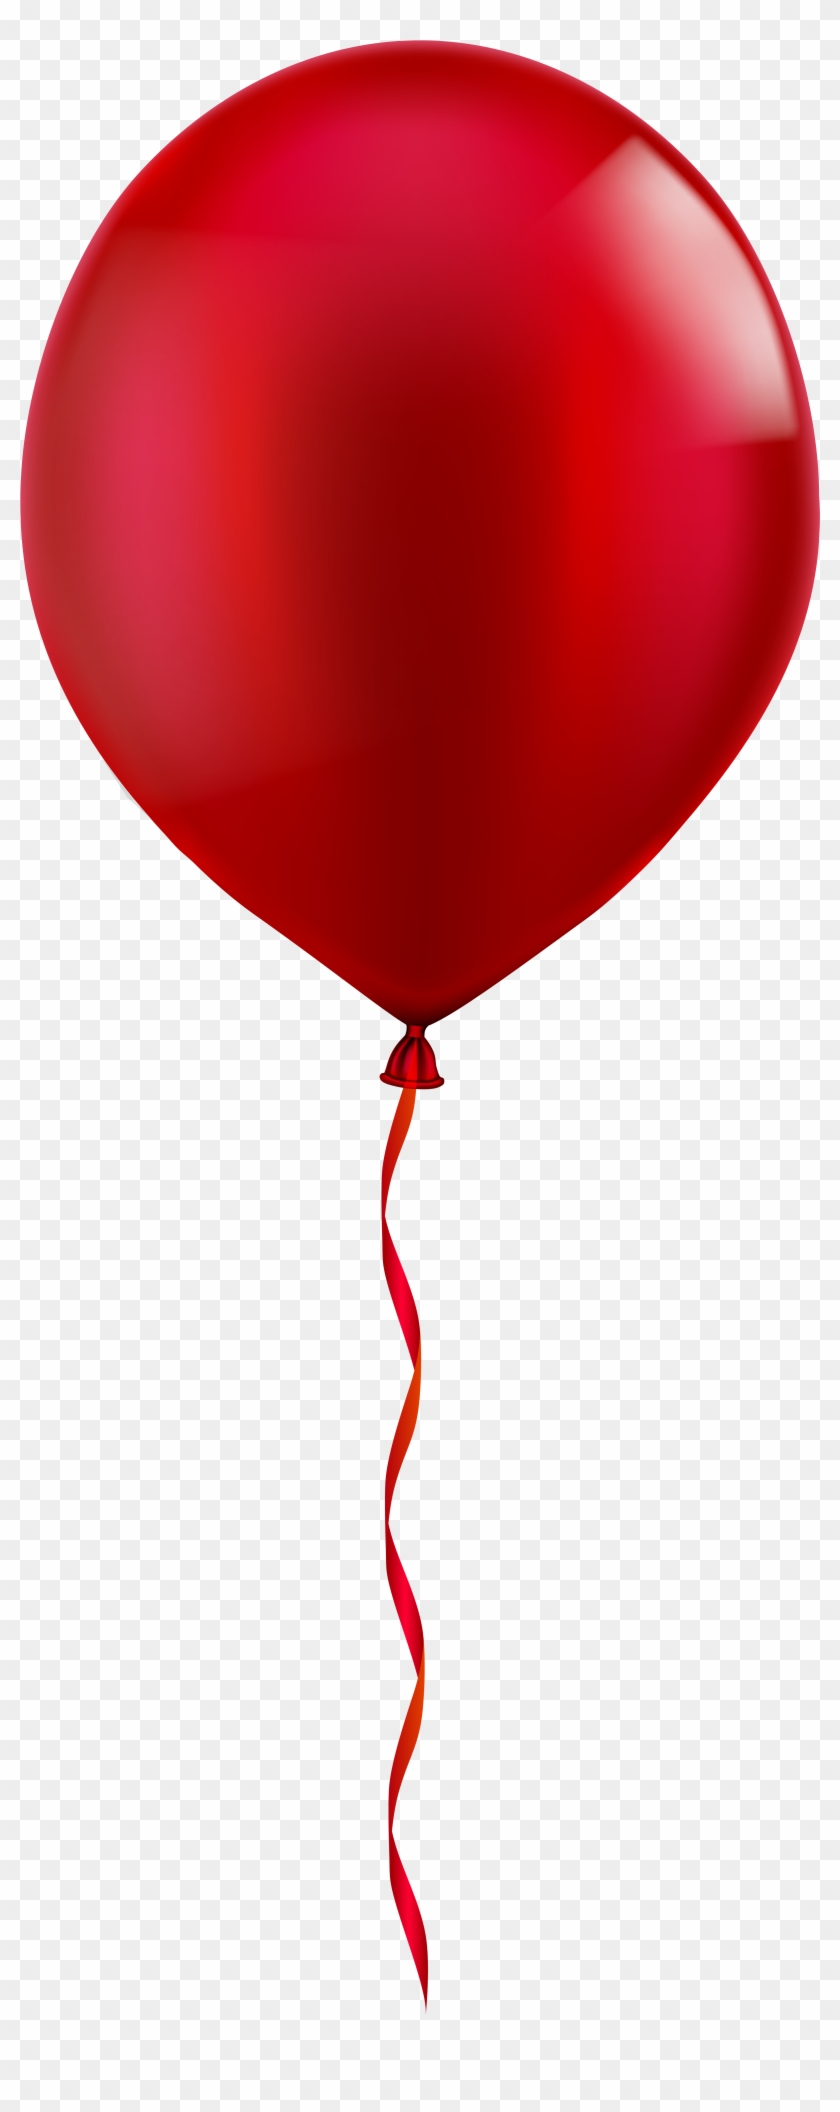 Red Balloon Transparent Background Clipart #175557